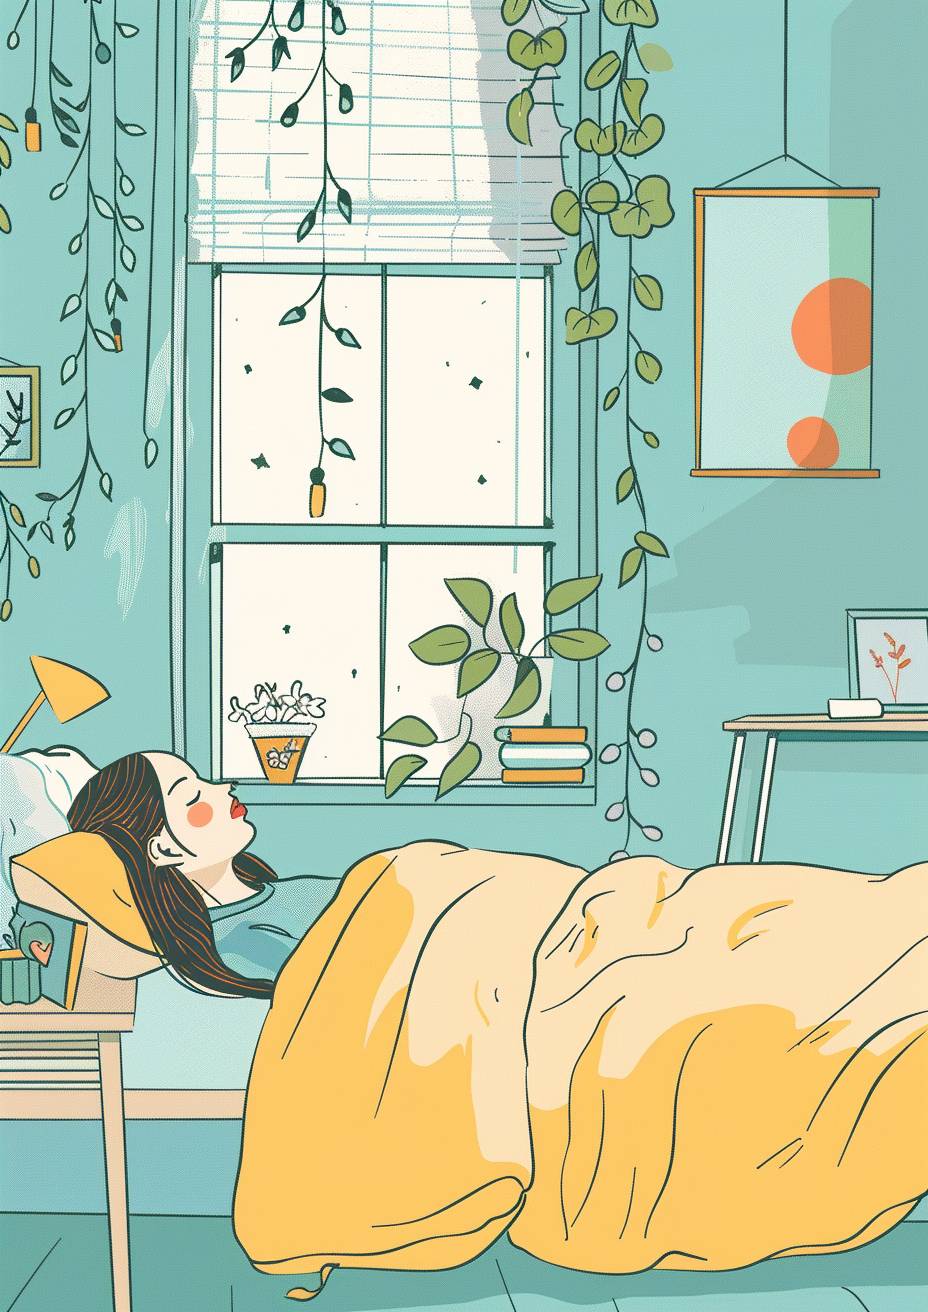 The girl is lying on the bed in a 2D-style bedroom. There is a bed, a mint green, lavender, and buttery yellow blanket, a window, a desk, a chair, and a baby blue color with children's doodle coloring sticker style, fresh and soothing.